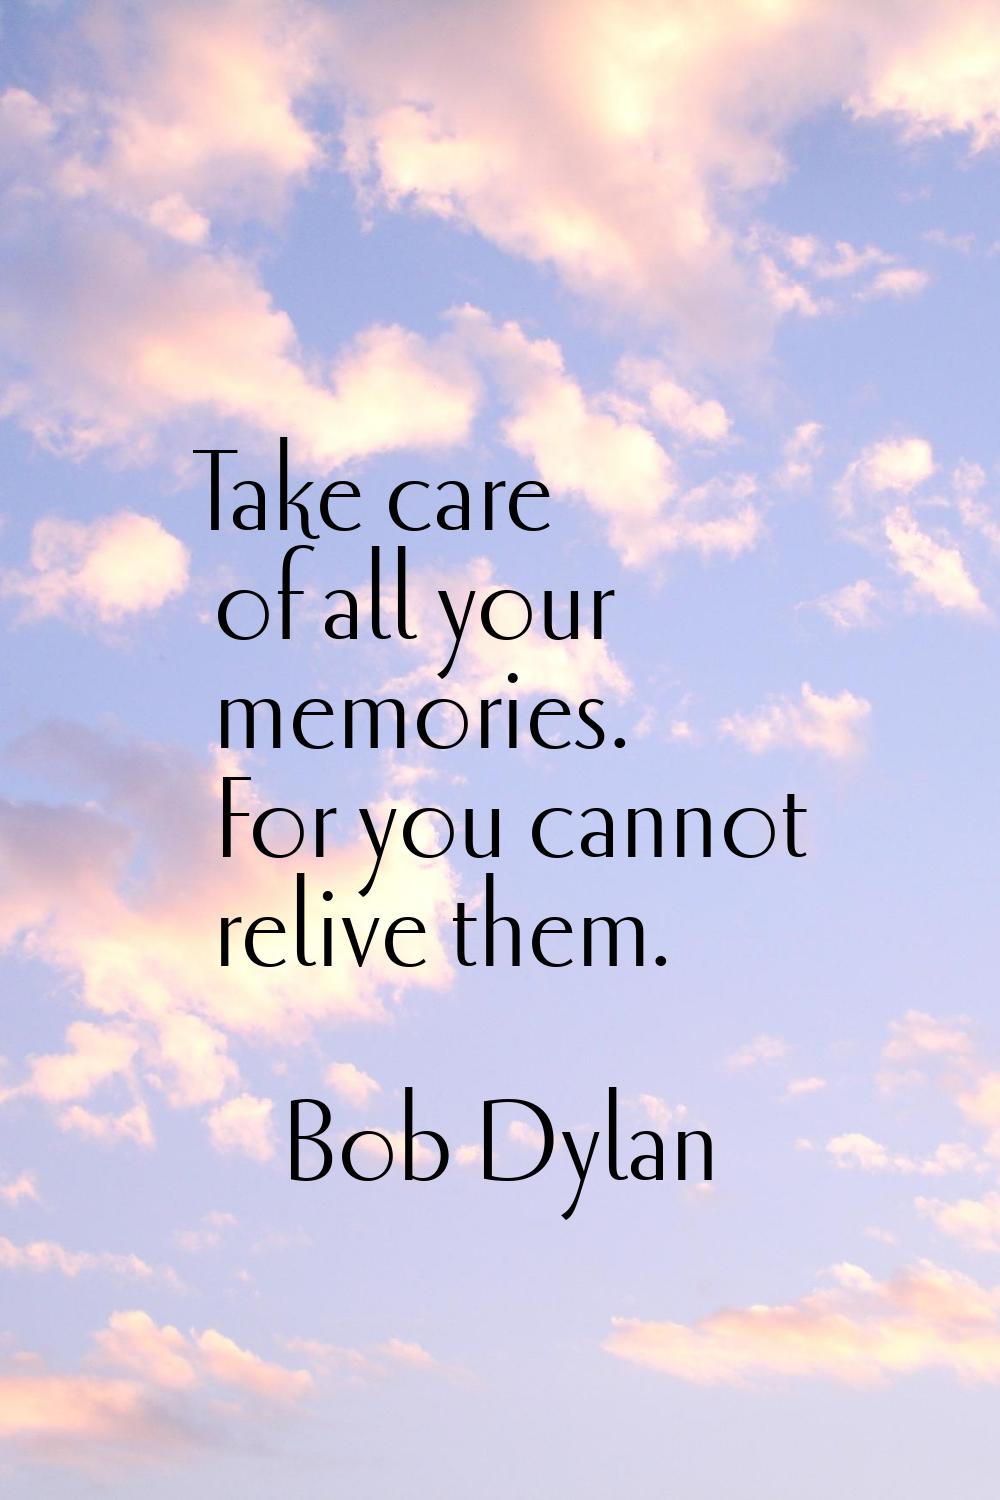 Take care of all your memories. For you cannot relive them.